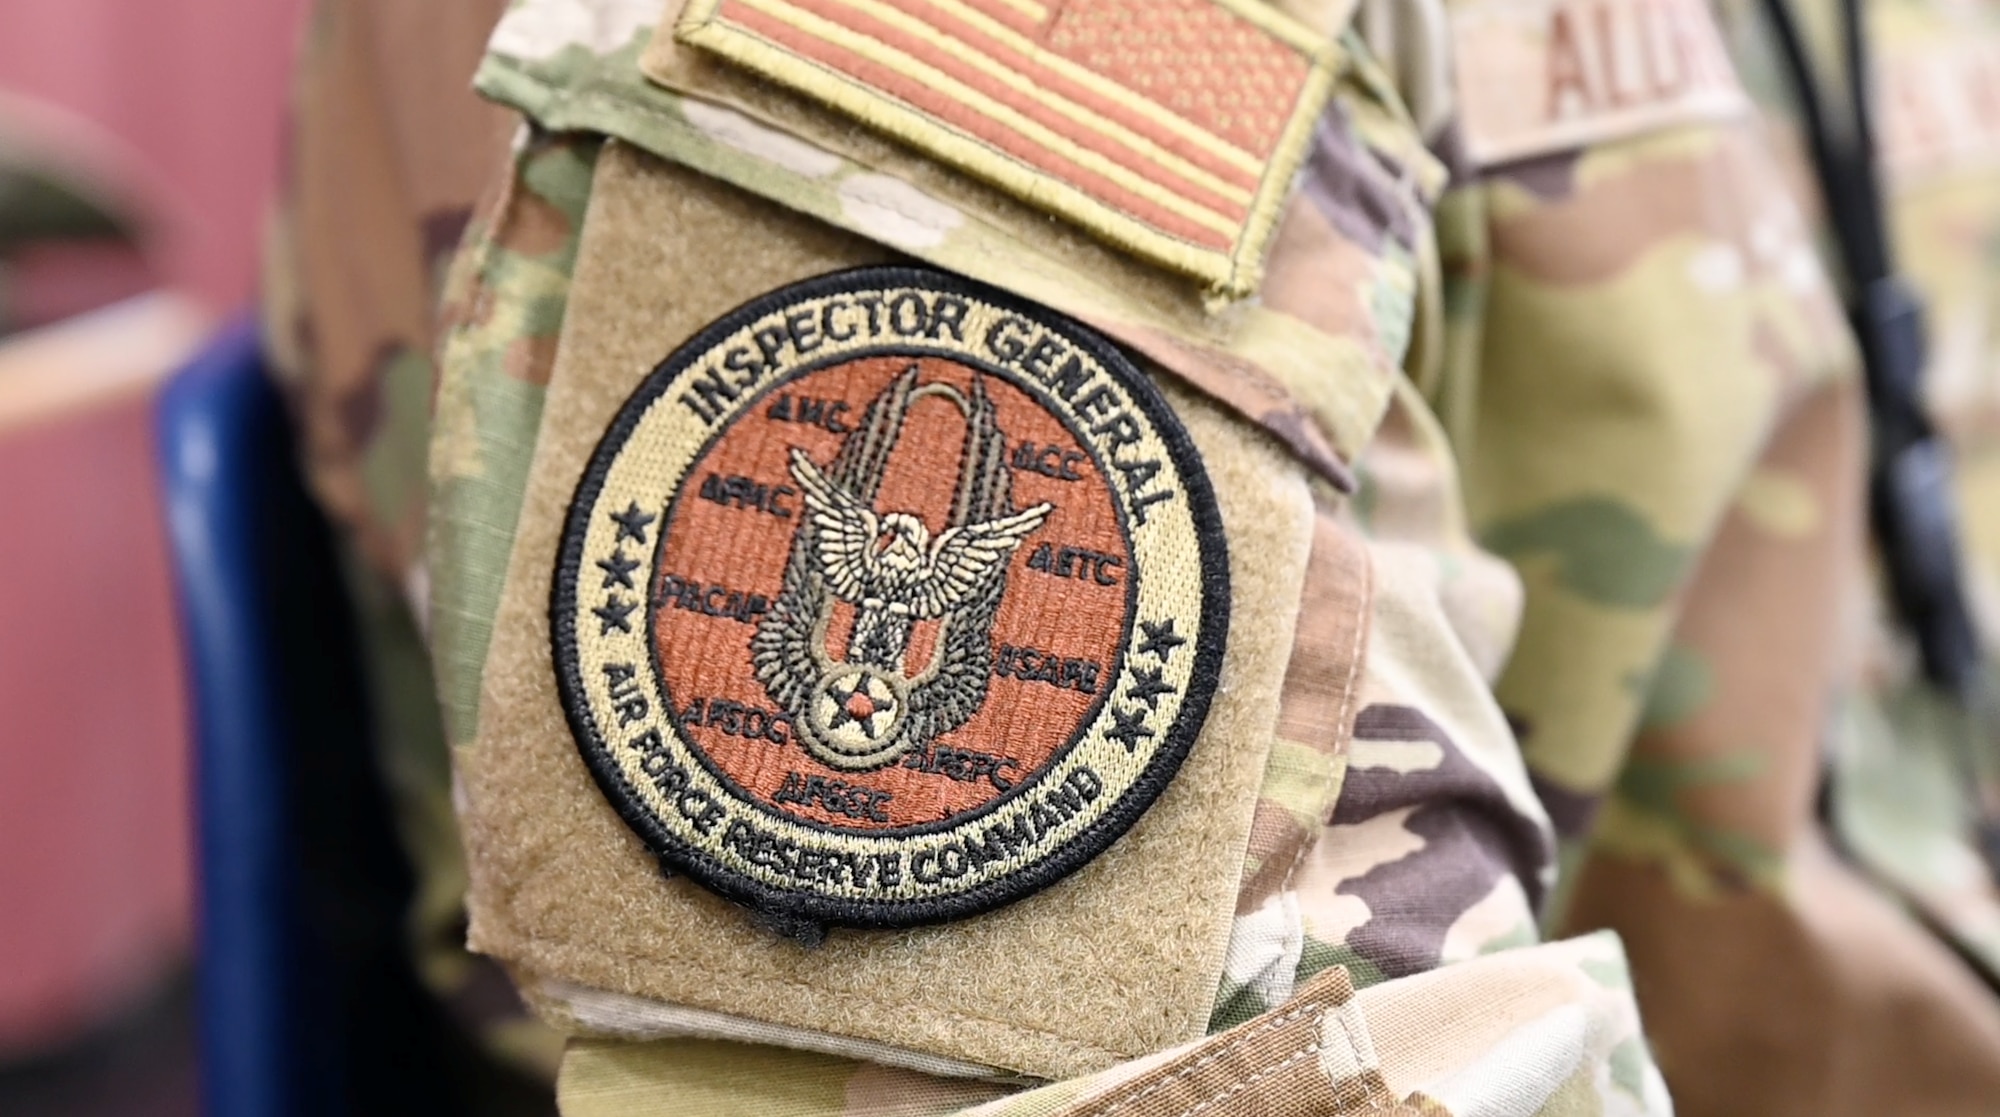 image of a patch